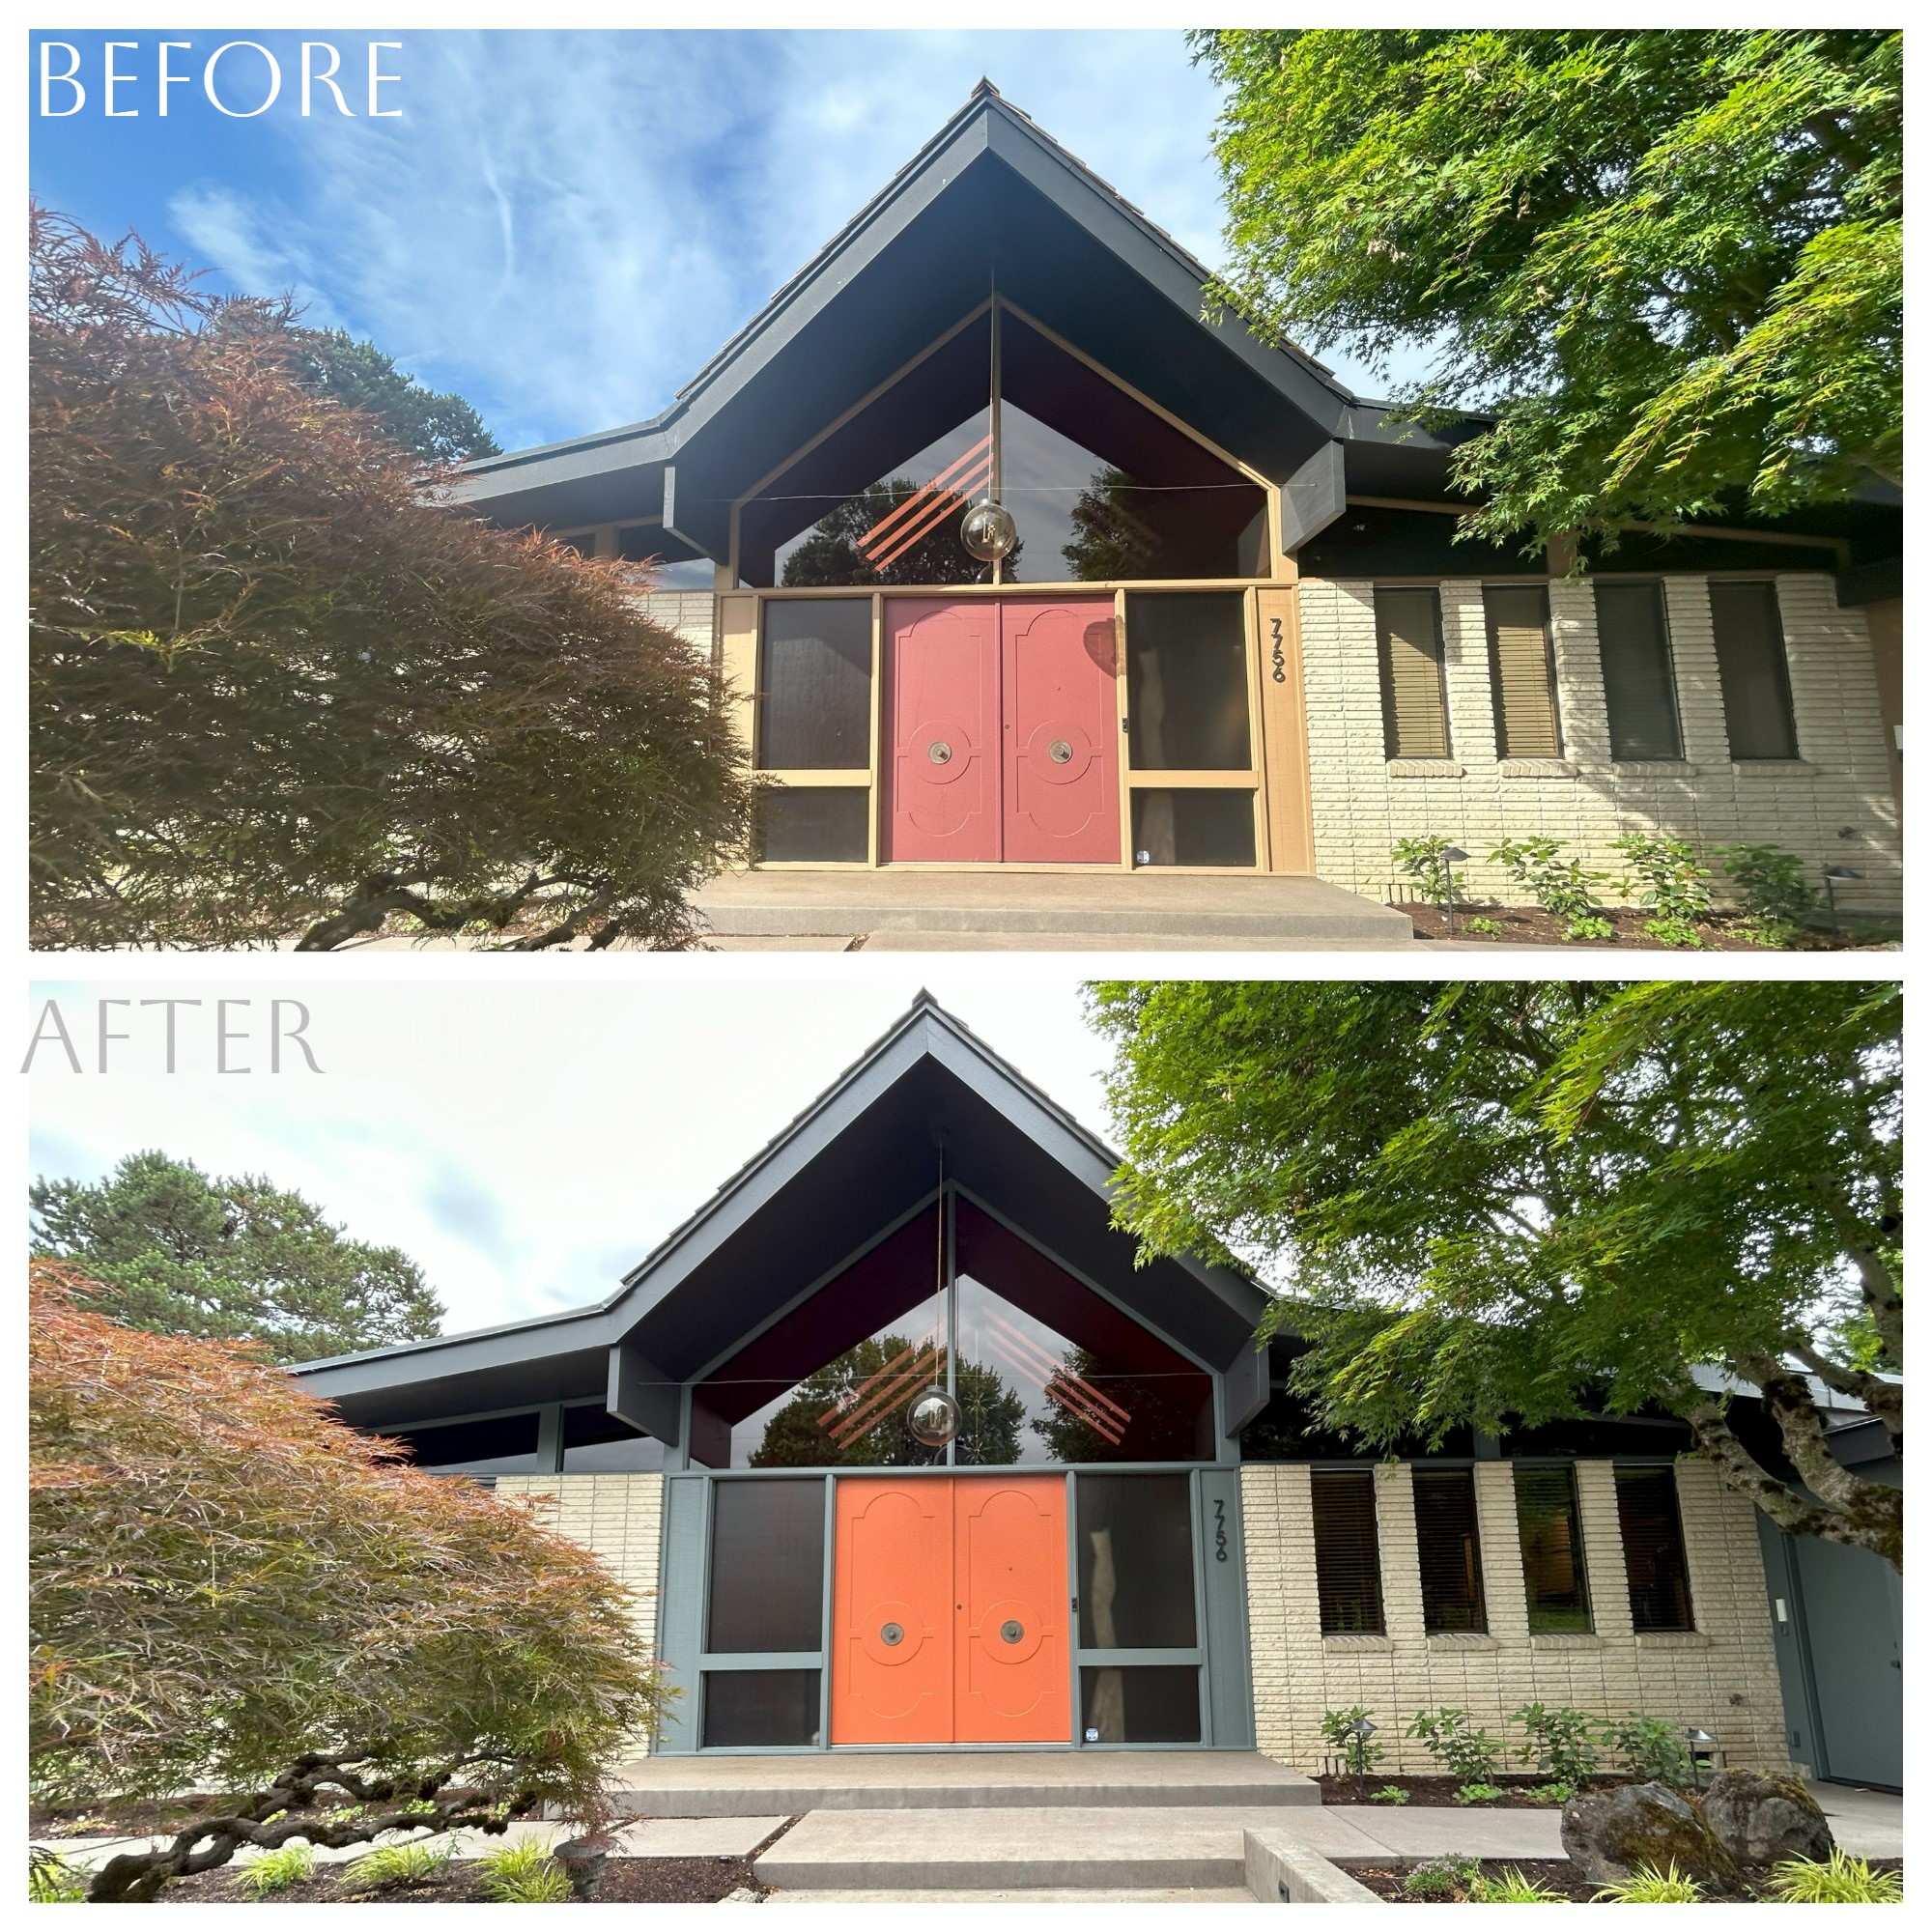 Before and after photos of an outdoor house with a red door.